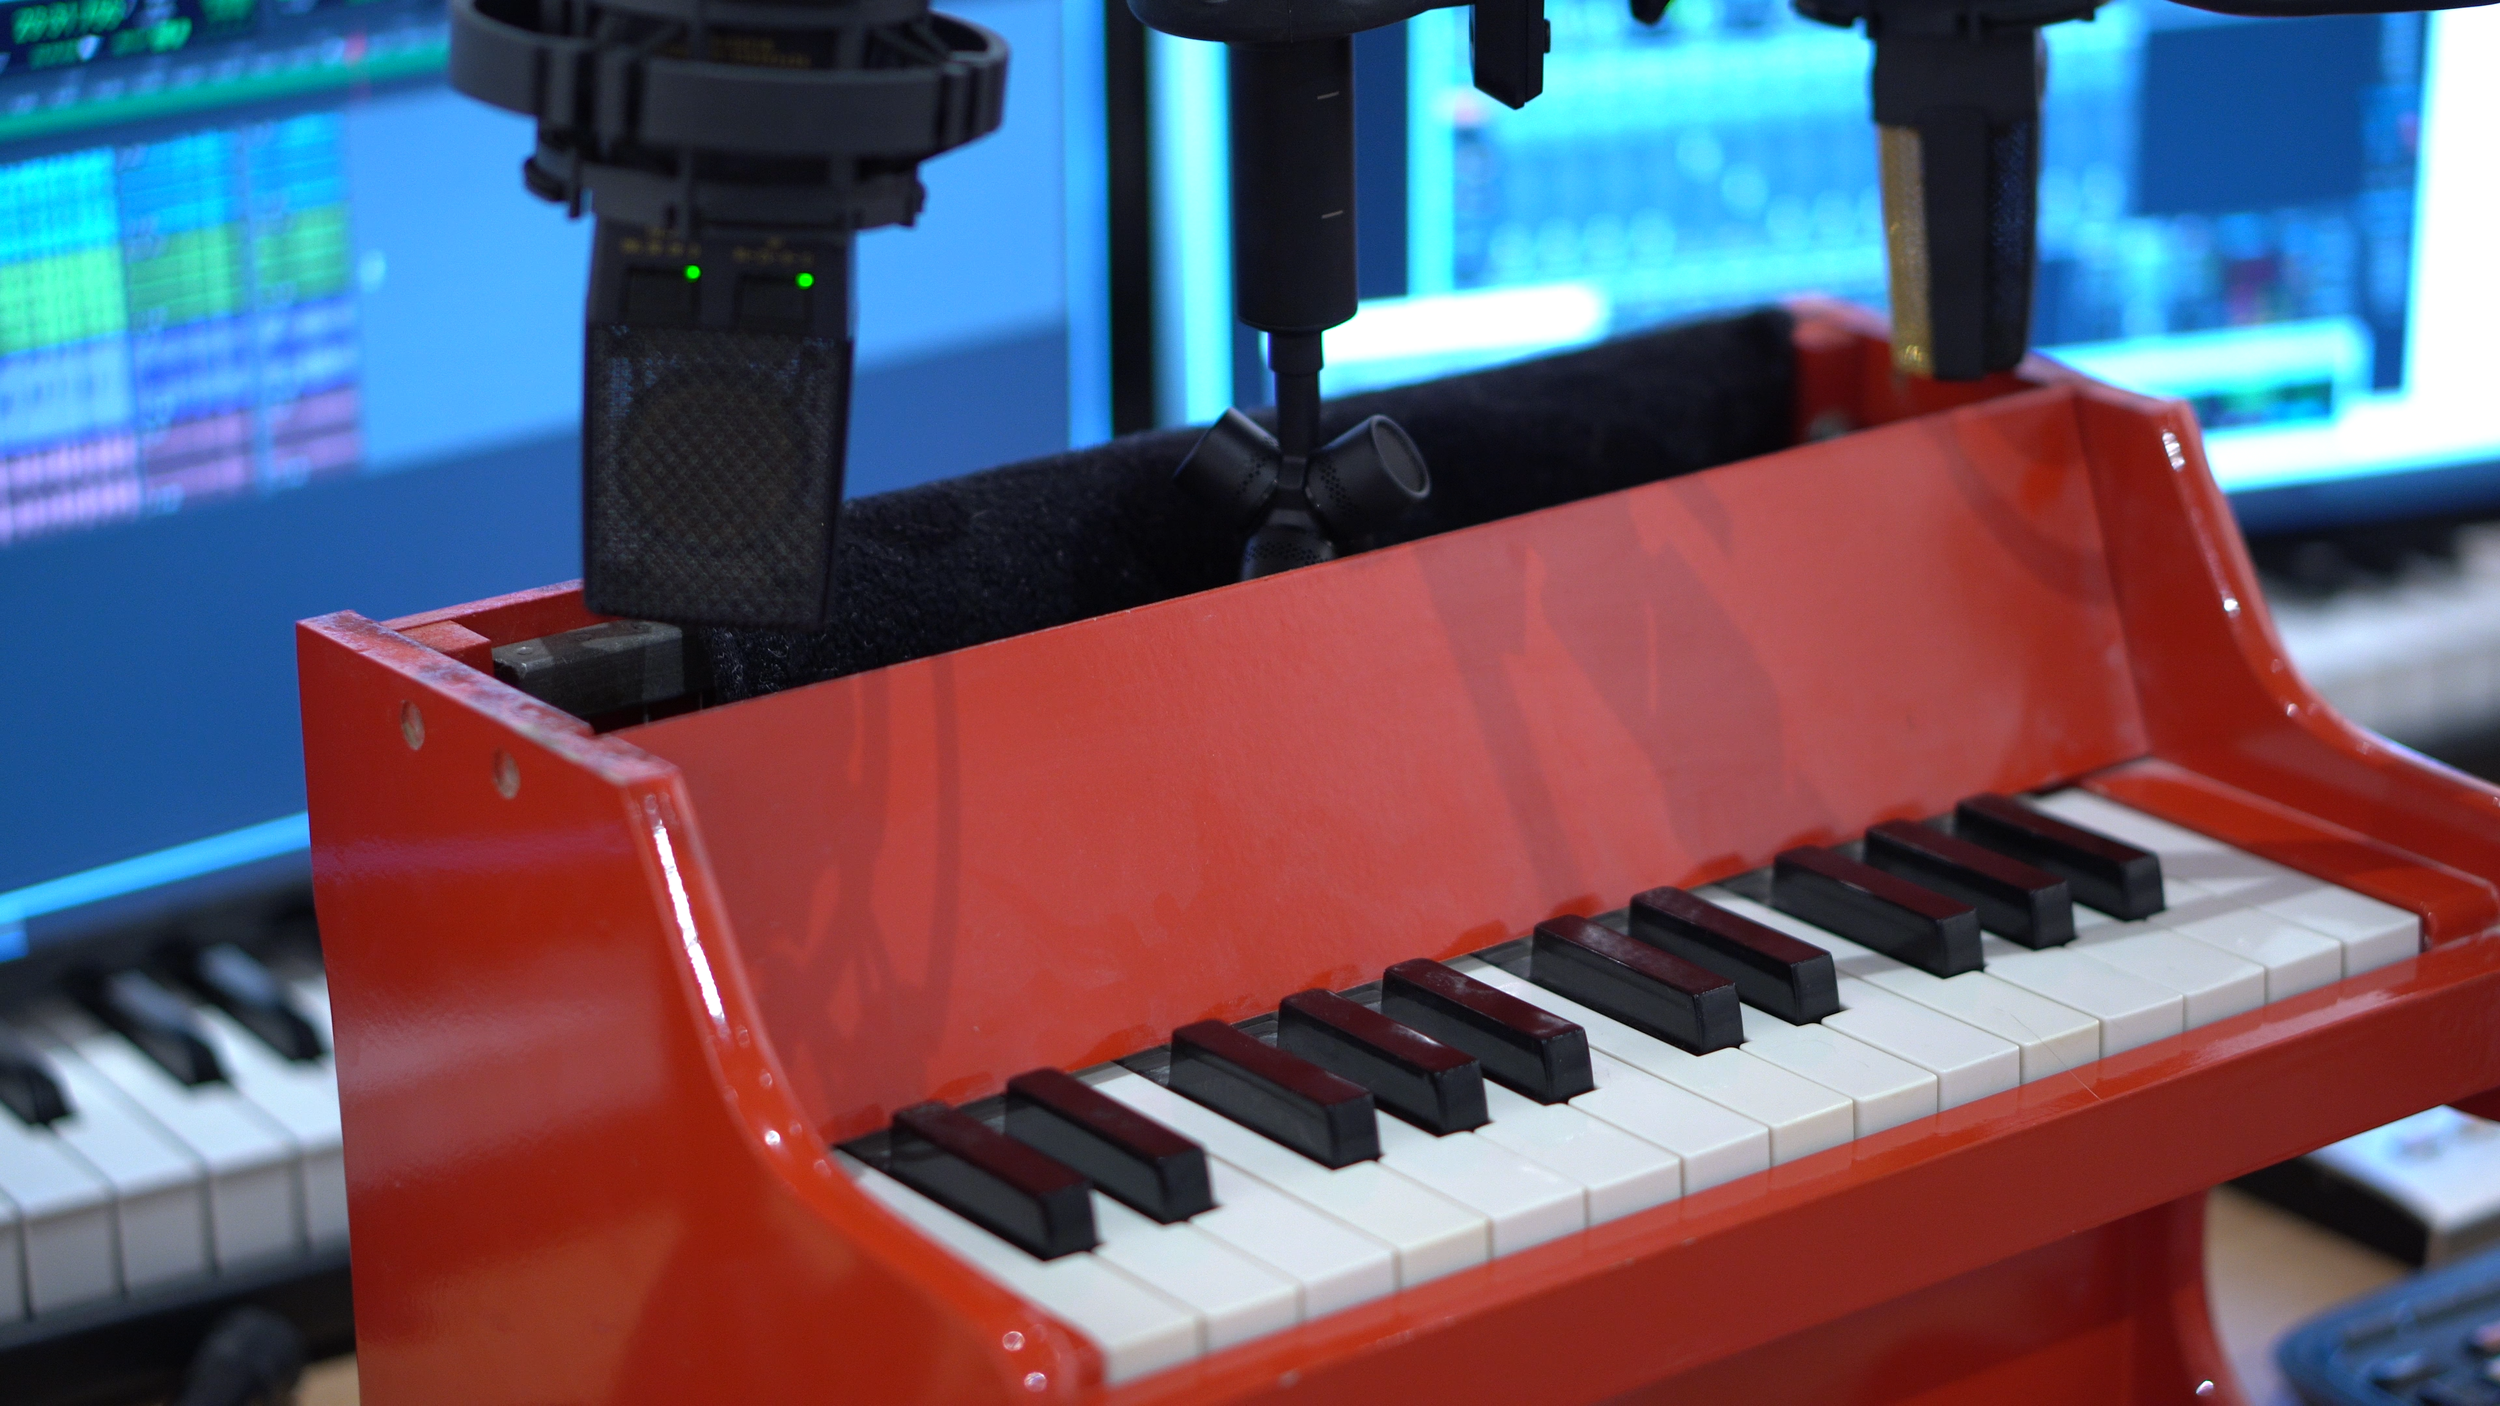 Audio Brewers Piano Toy